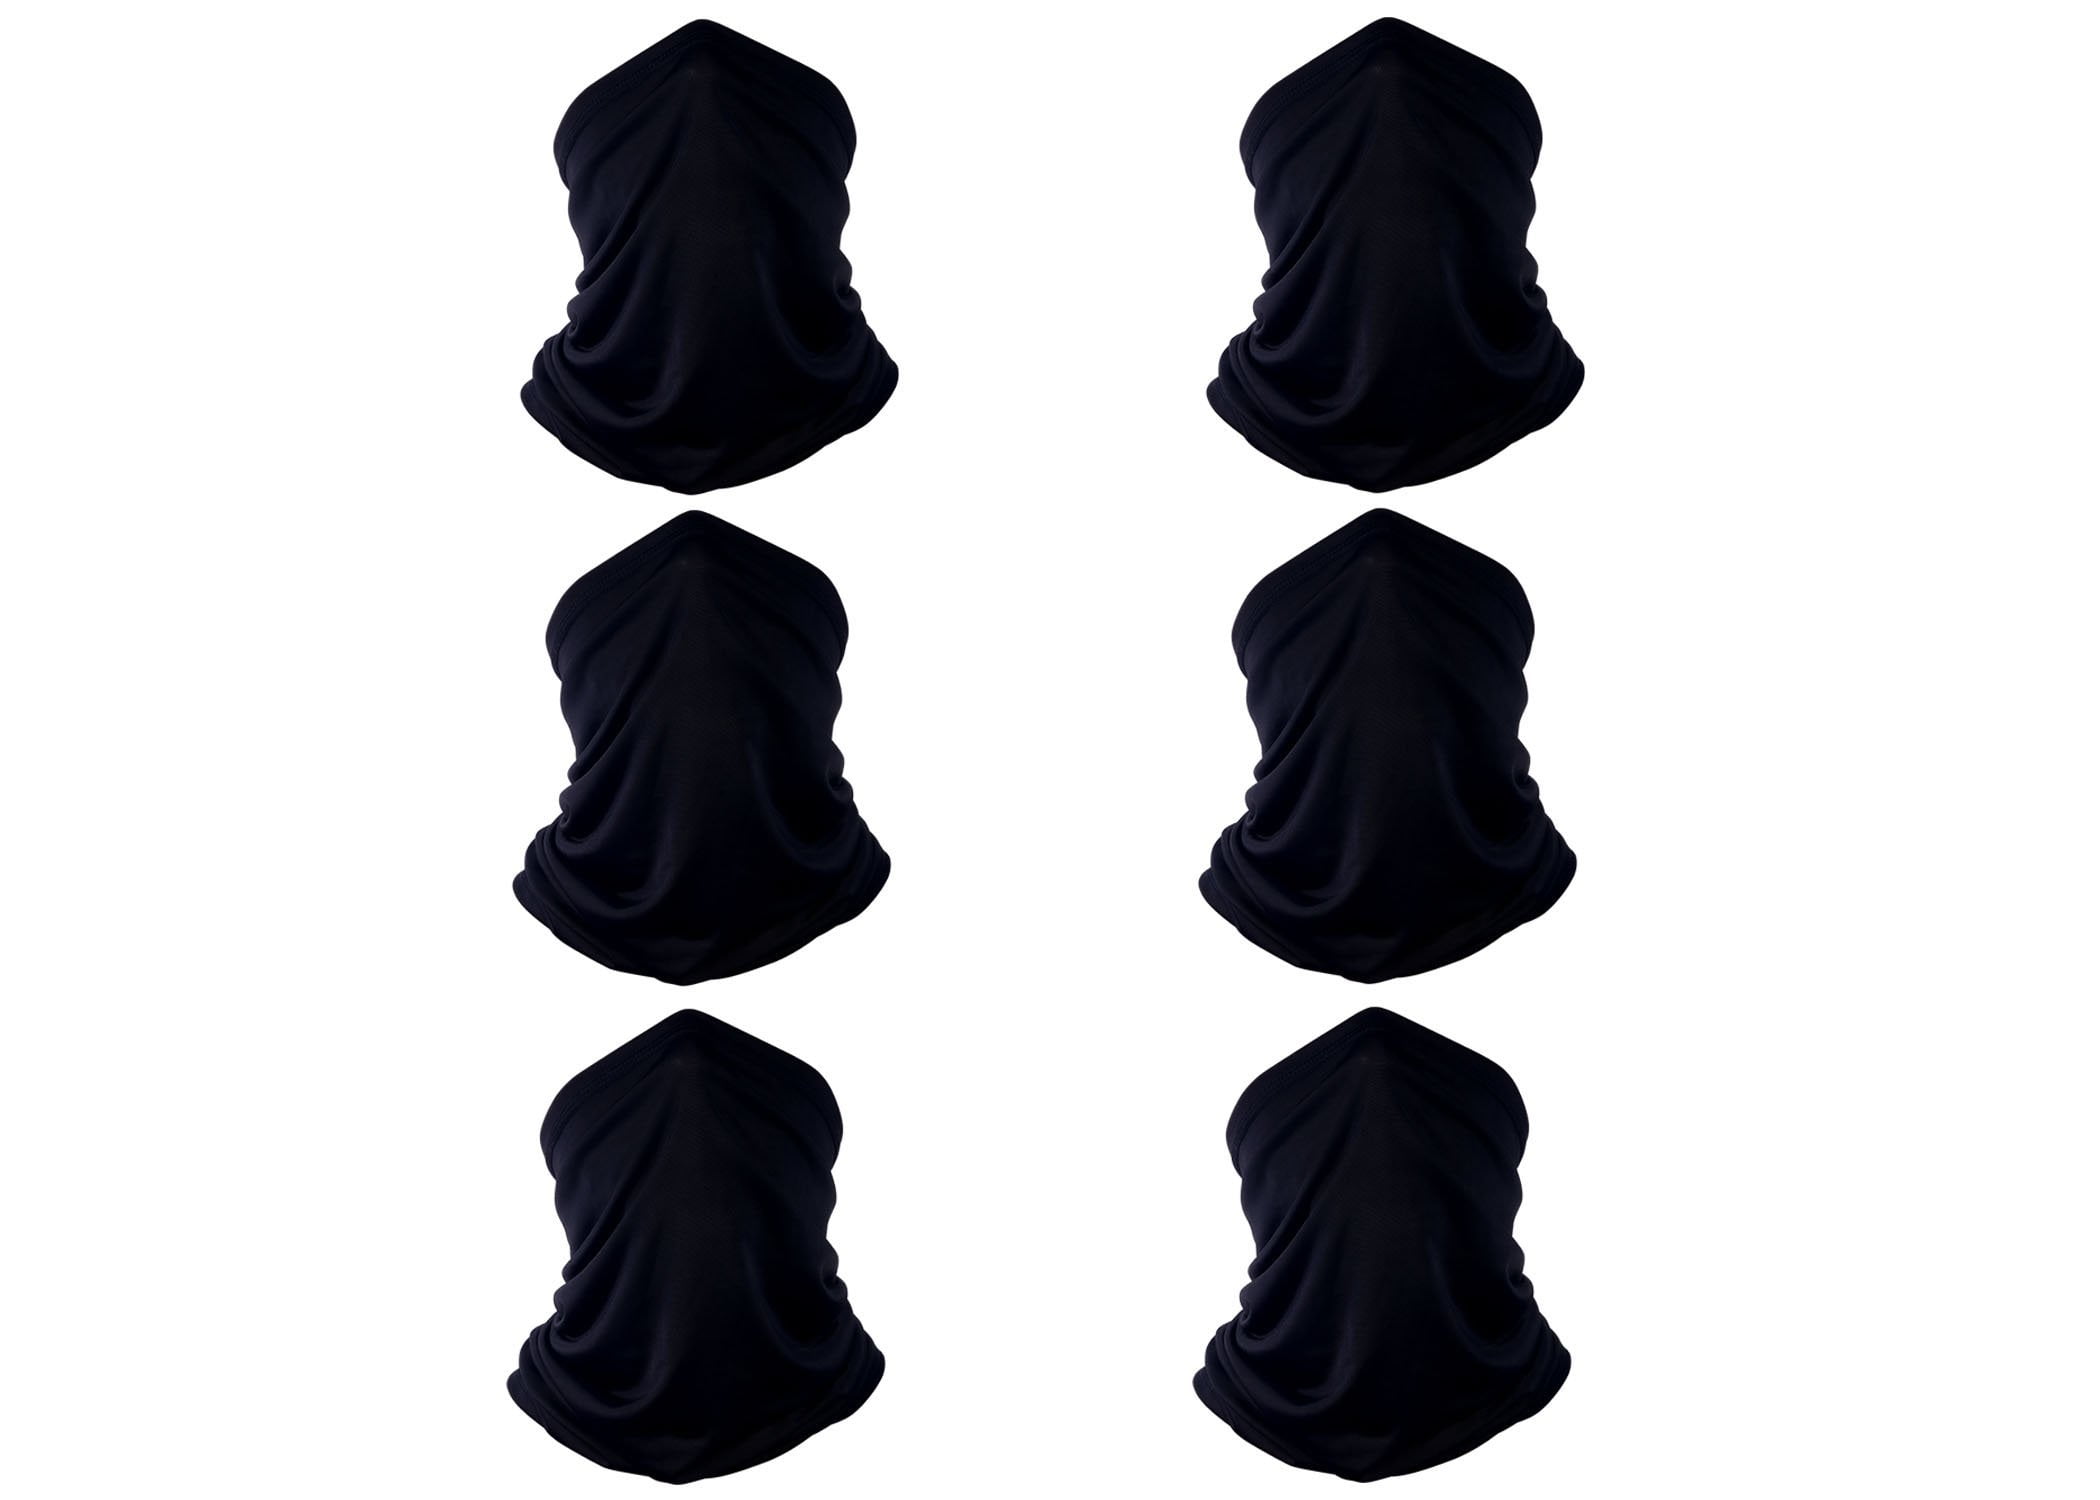 Details about   3/5x Black Neck Gaiter Tube Scarf Face Mask for Motorcycle Cycling Bandana US 